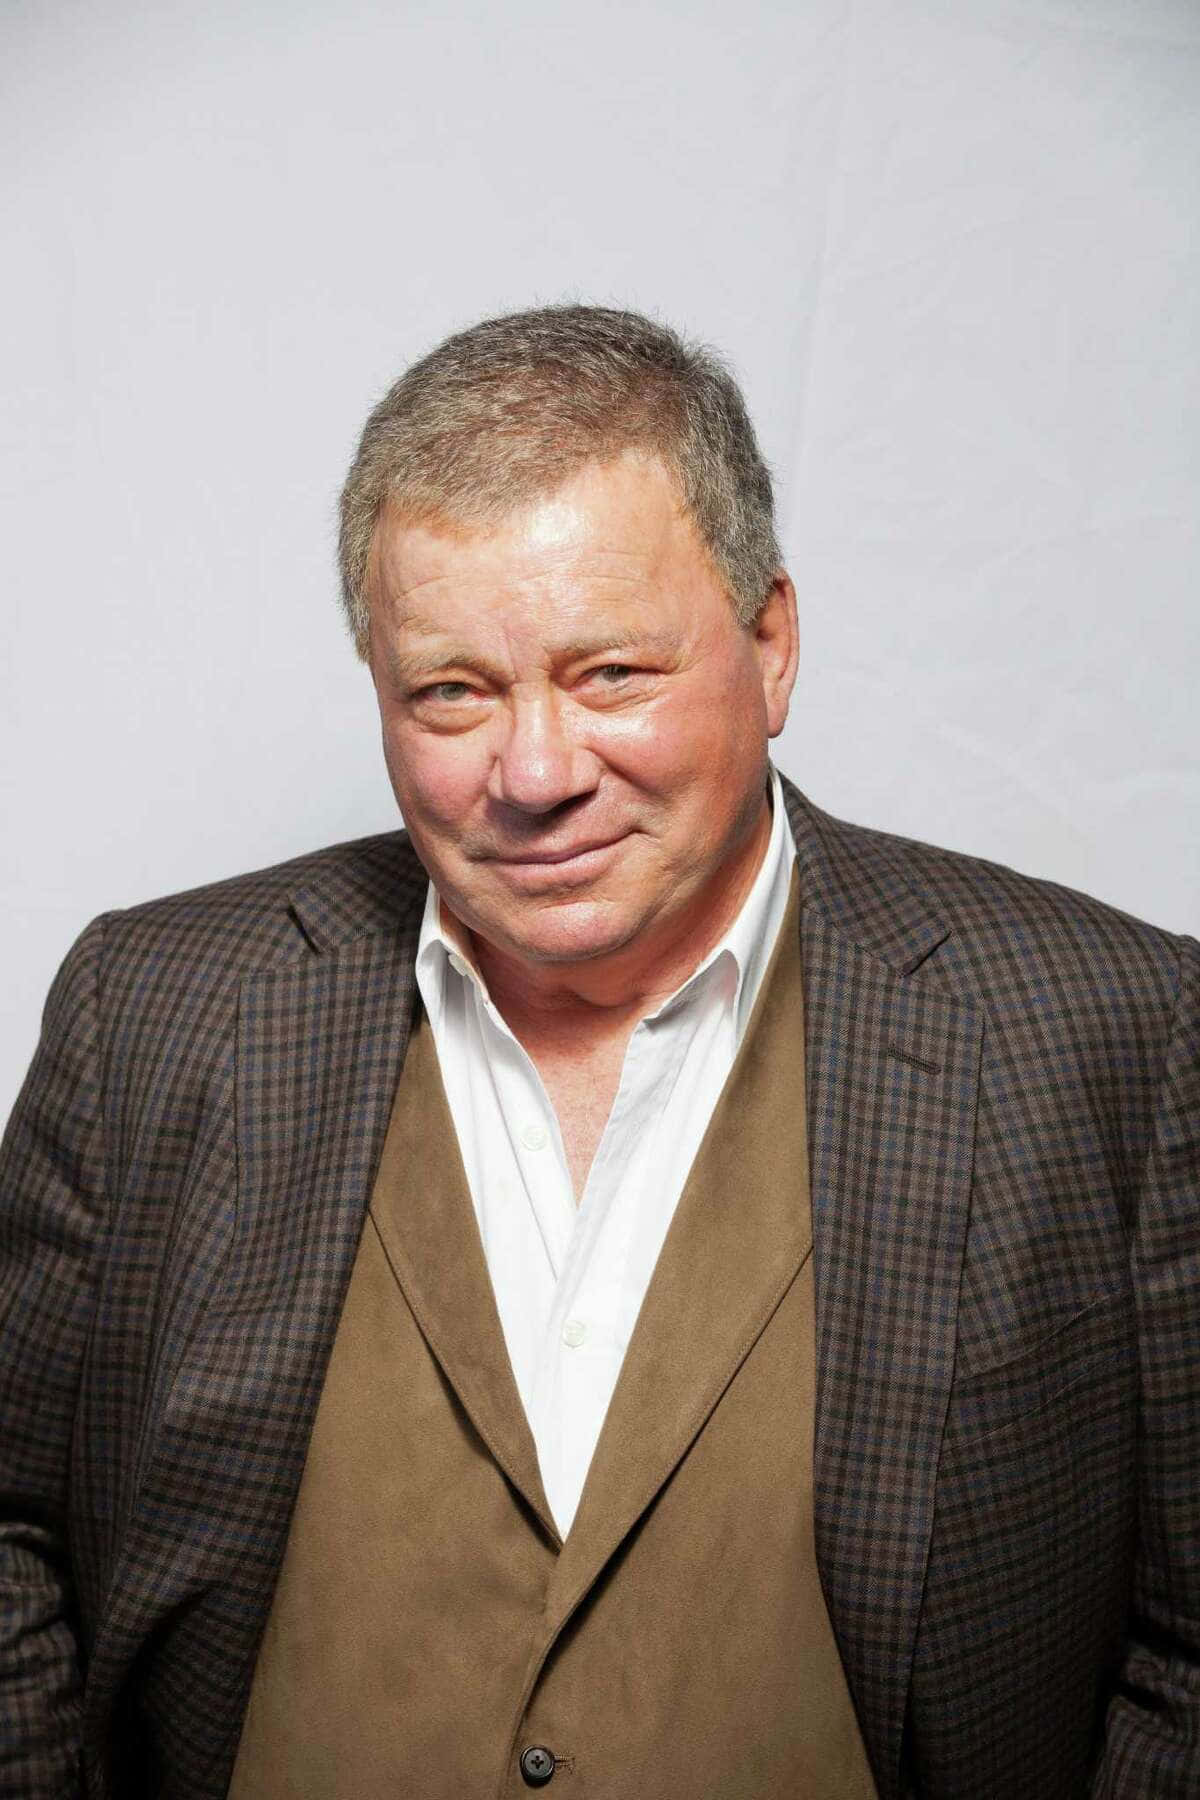 William Shatner standing with a confident expression Wallpaper